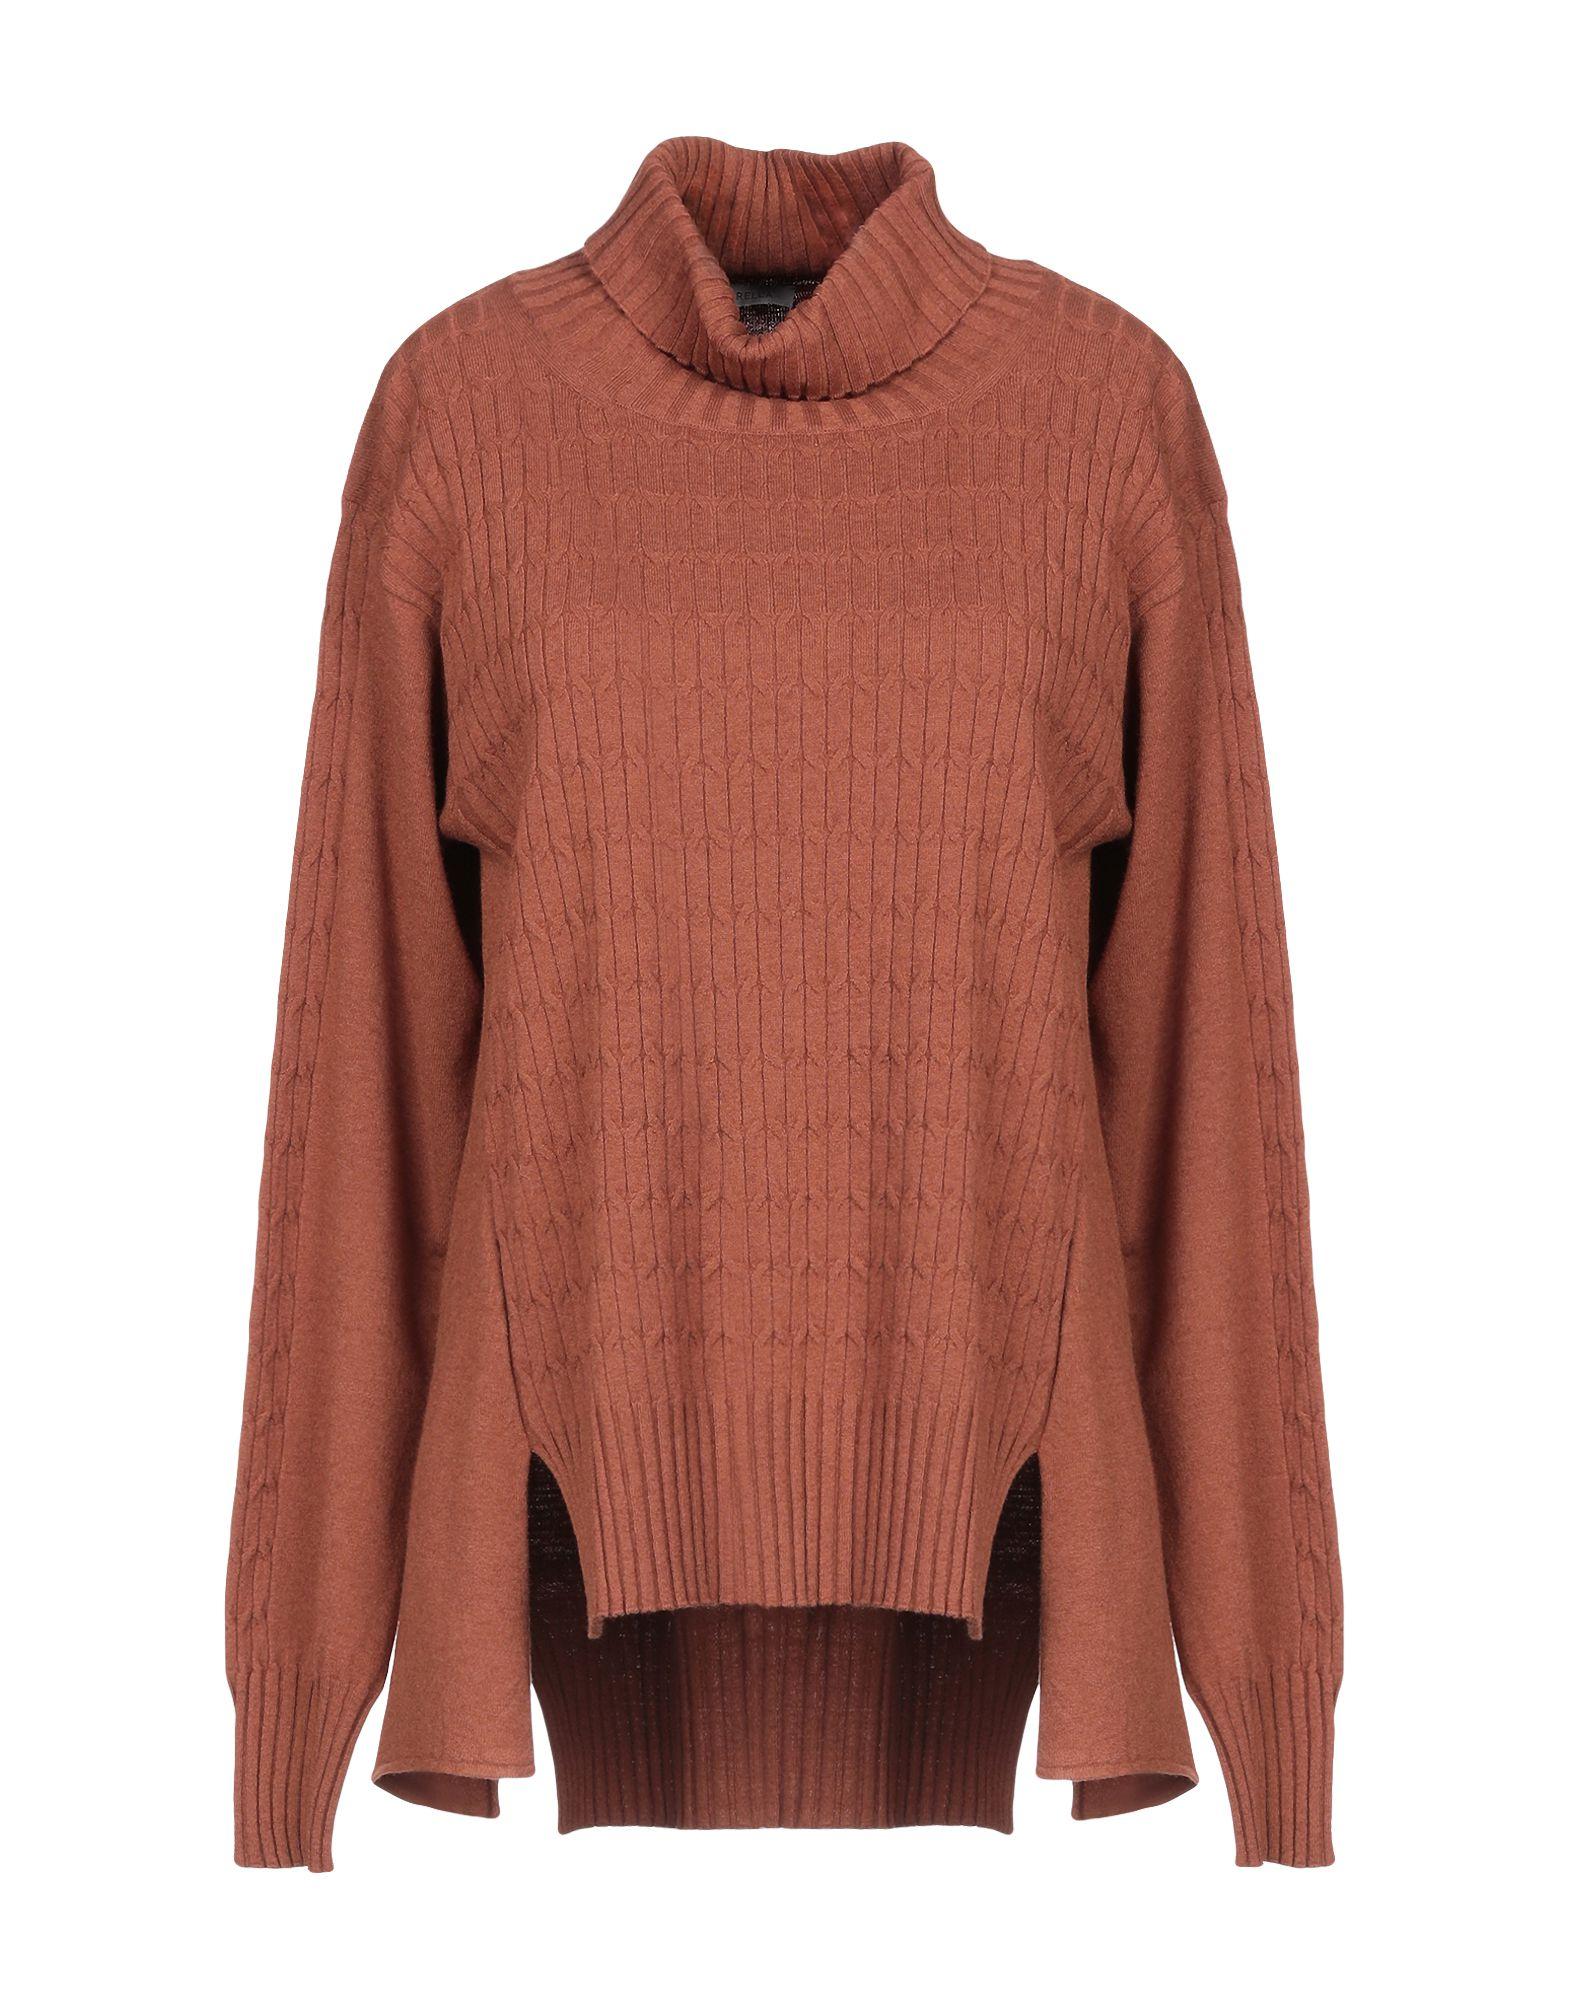 Marella Synthetic Turtleneck in Brown - Lyst